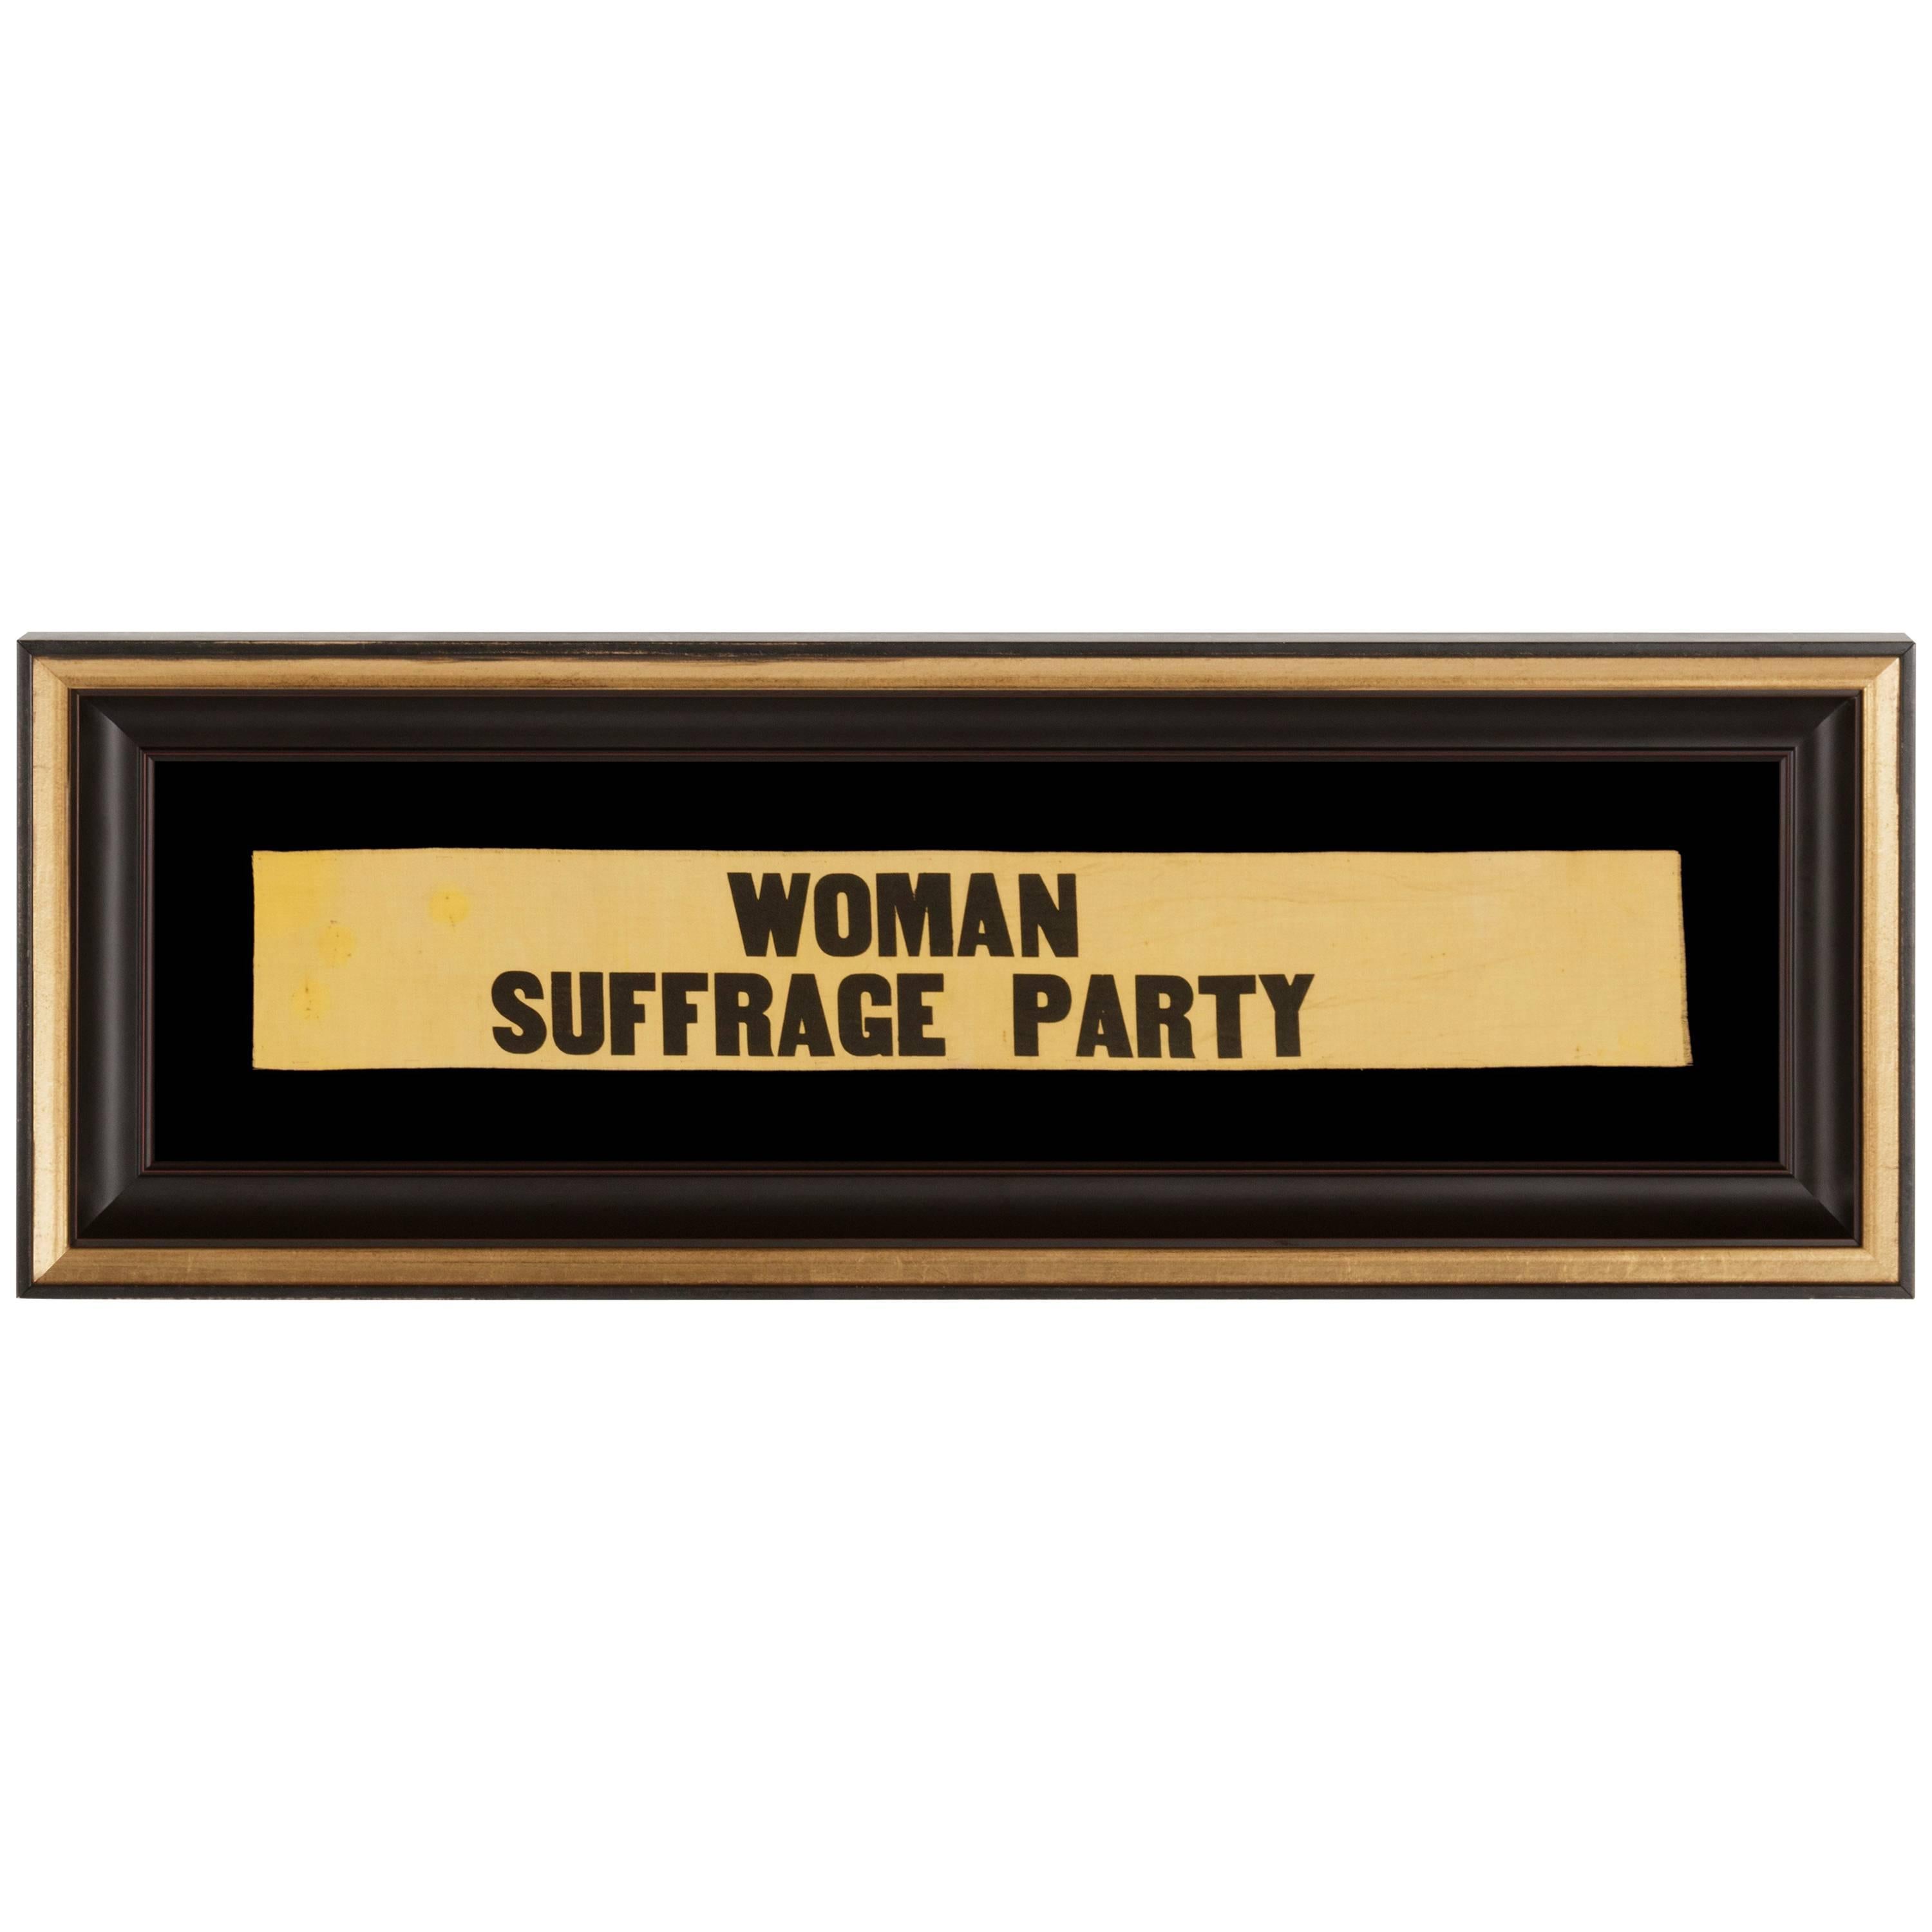 Yellow Suffragette Ribbon Made for Carrie Chapman Catt's "Woman Suffrage Party"